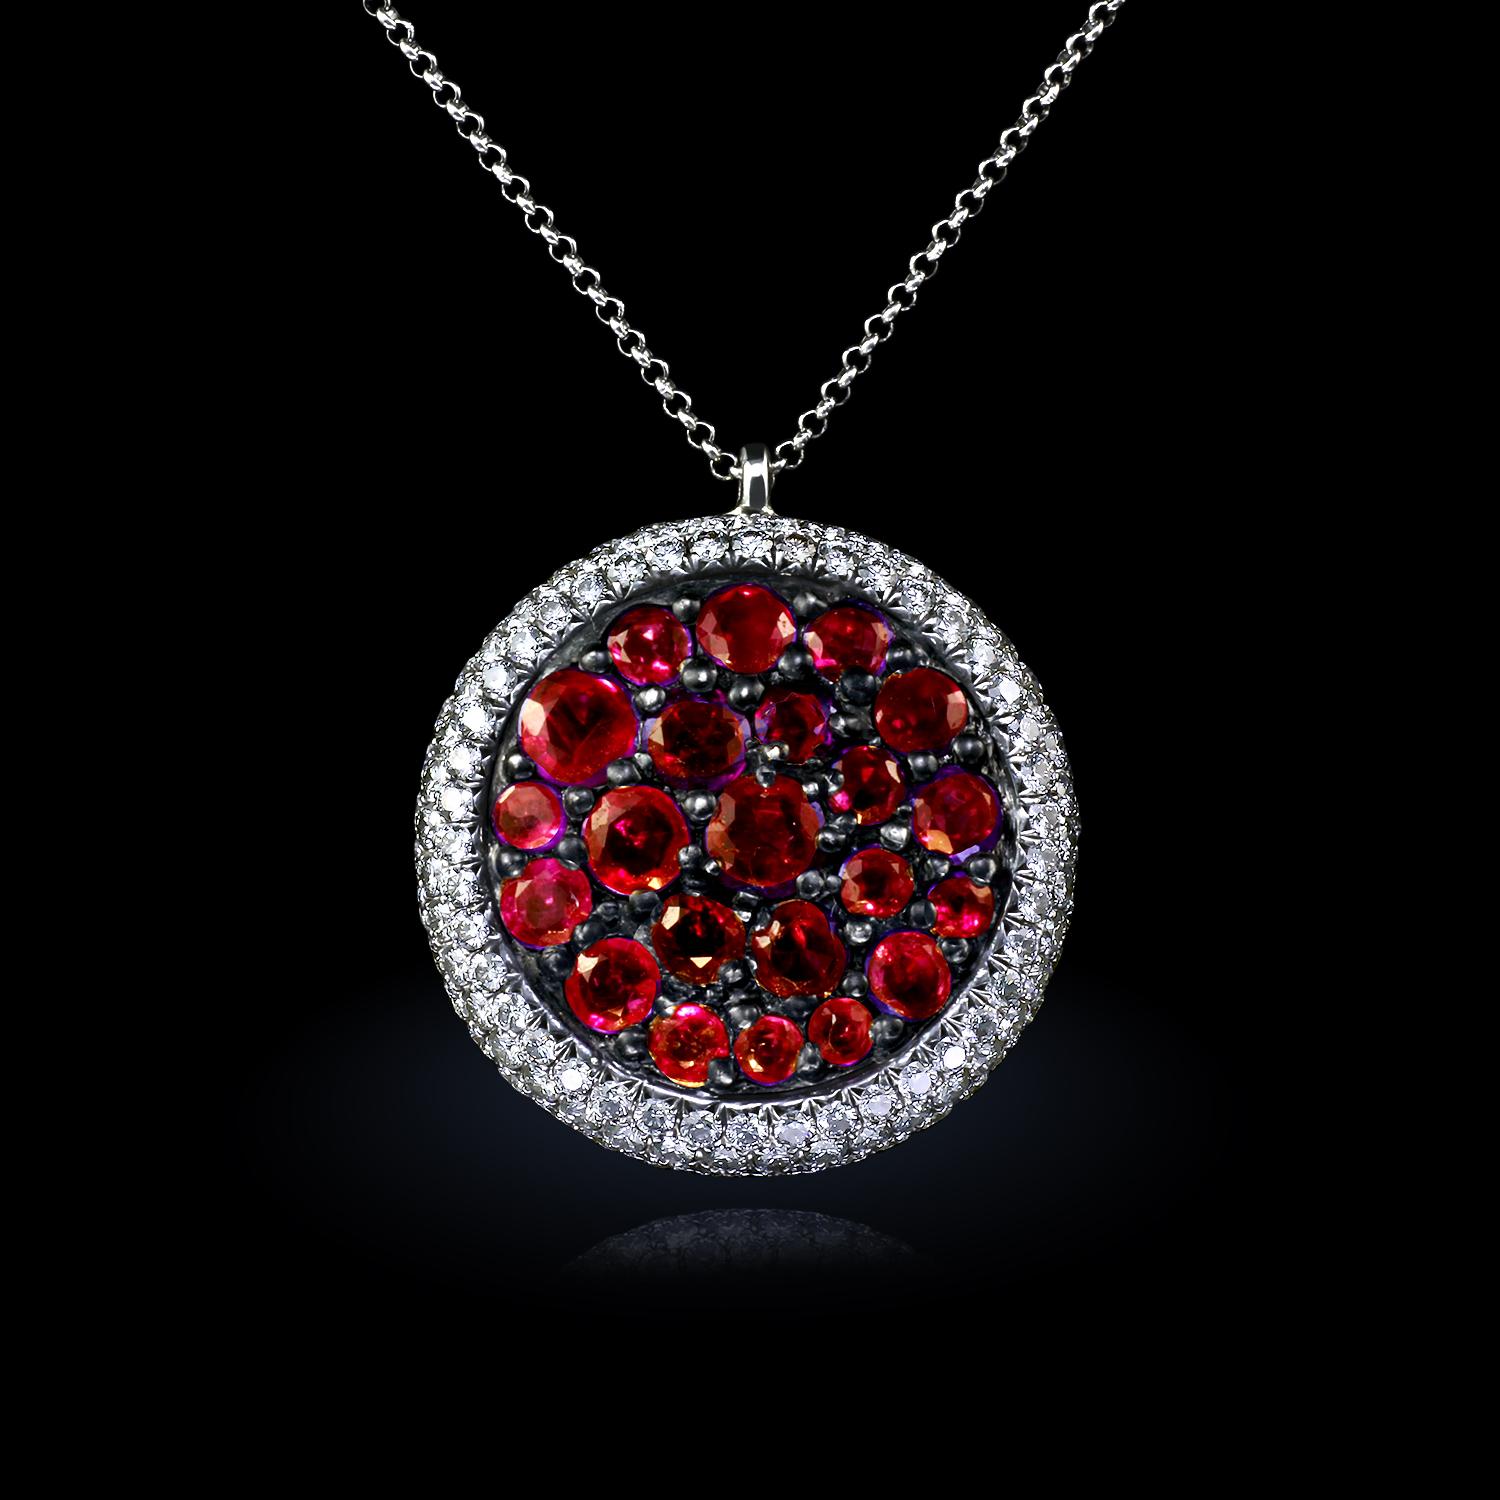 Contemporary Leon Mege Reversible Micro Pave Pendant with Carved Moonstone, Rubies, Diamonds For Sale